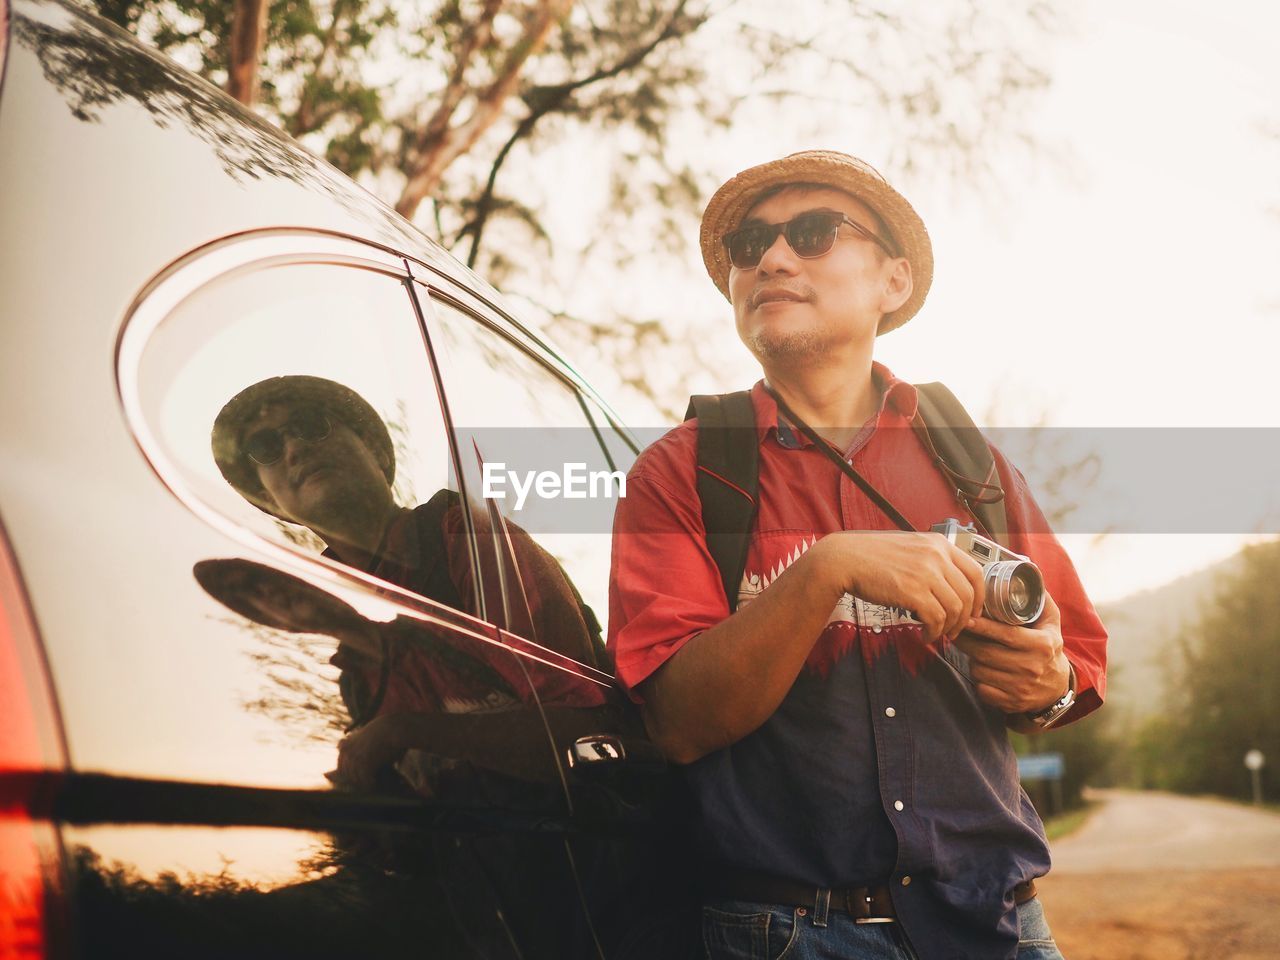 Man in sunglasses holding camera while standing by car